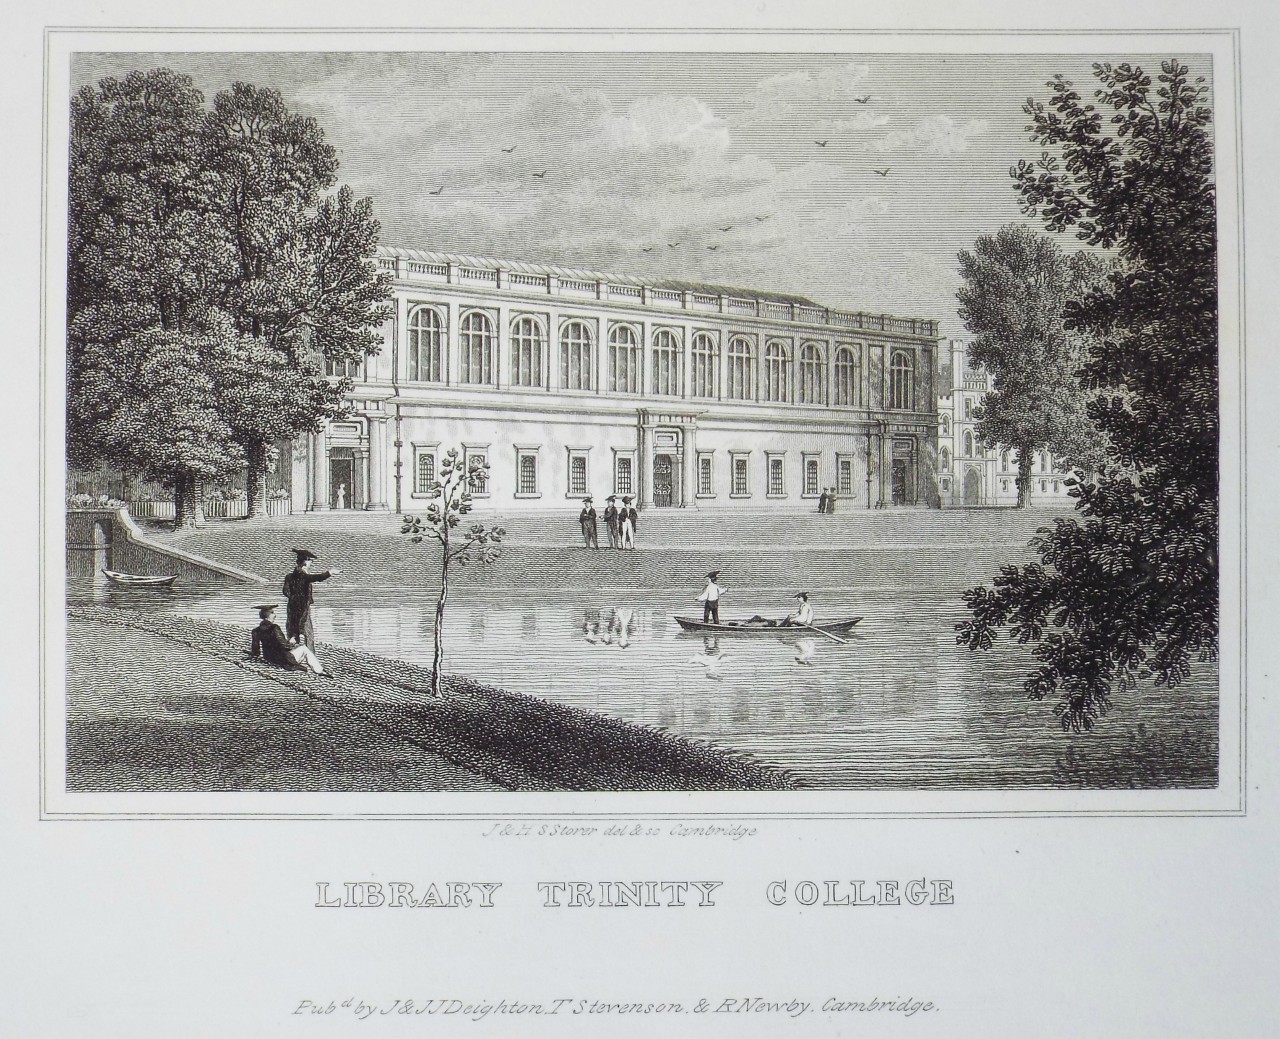 Print - Library Trinity College - Storer